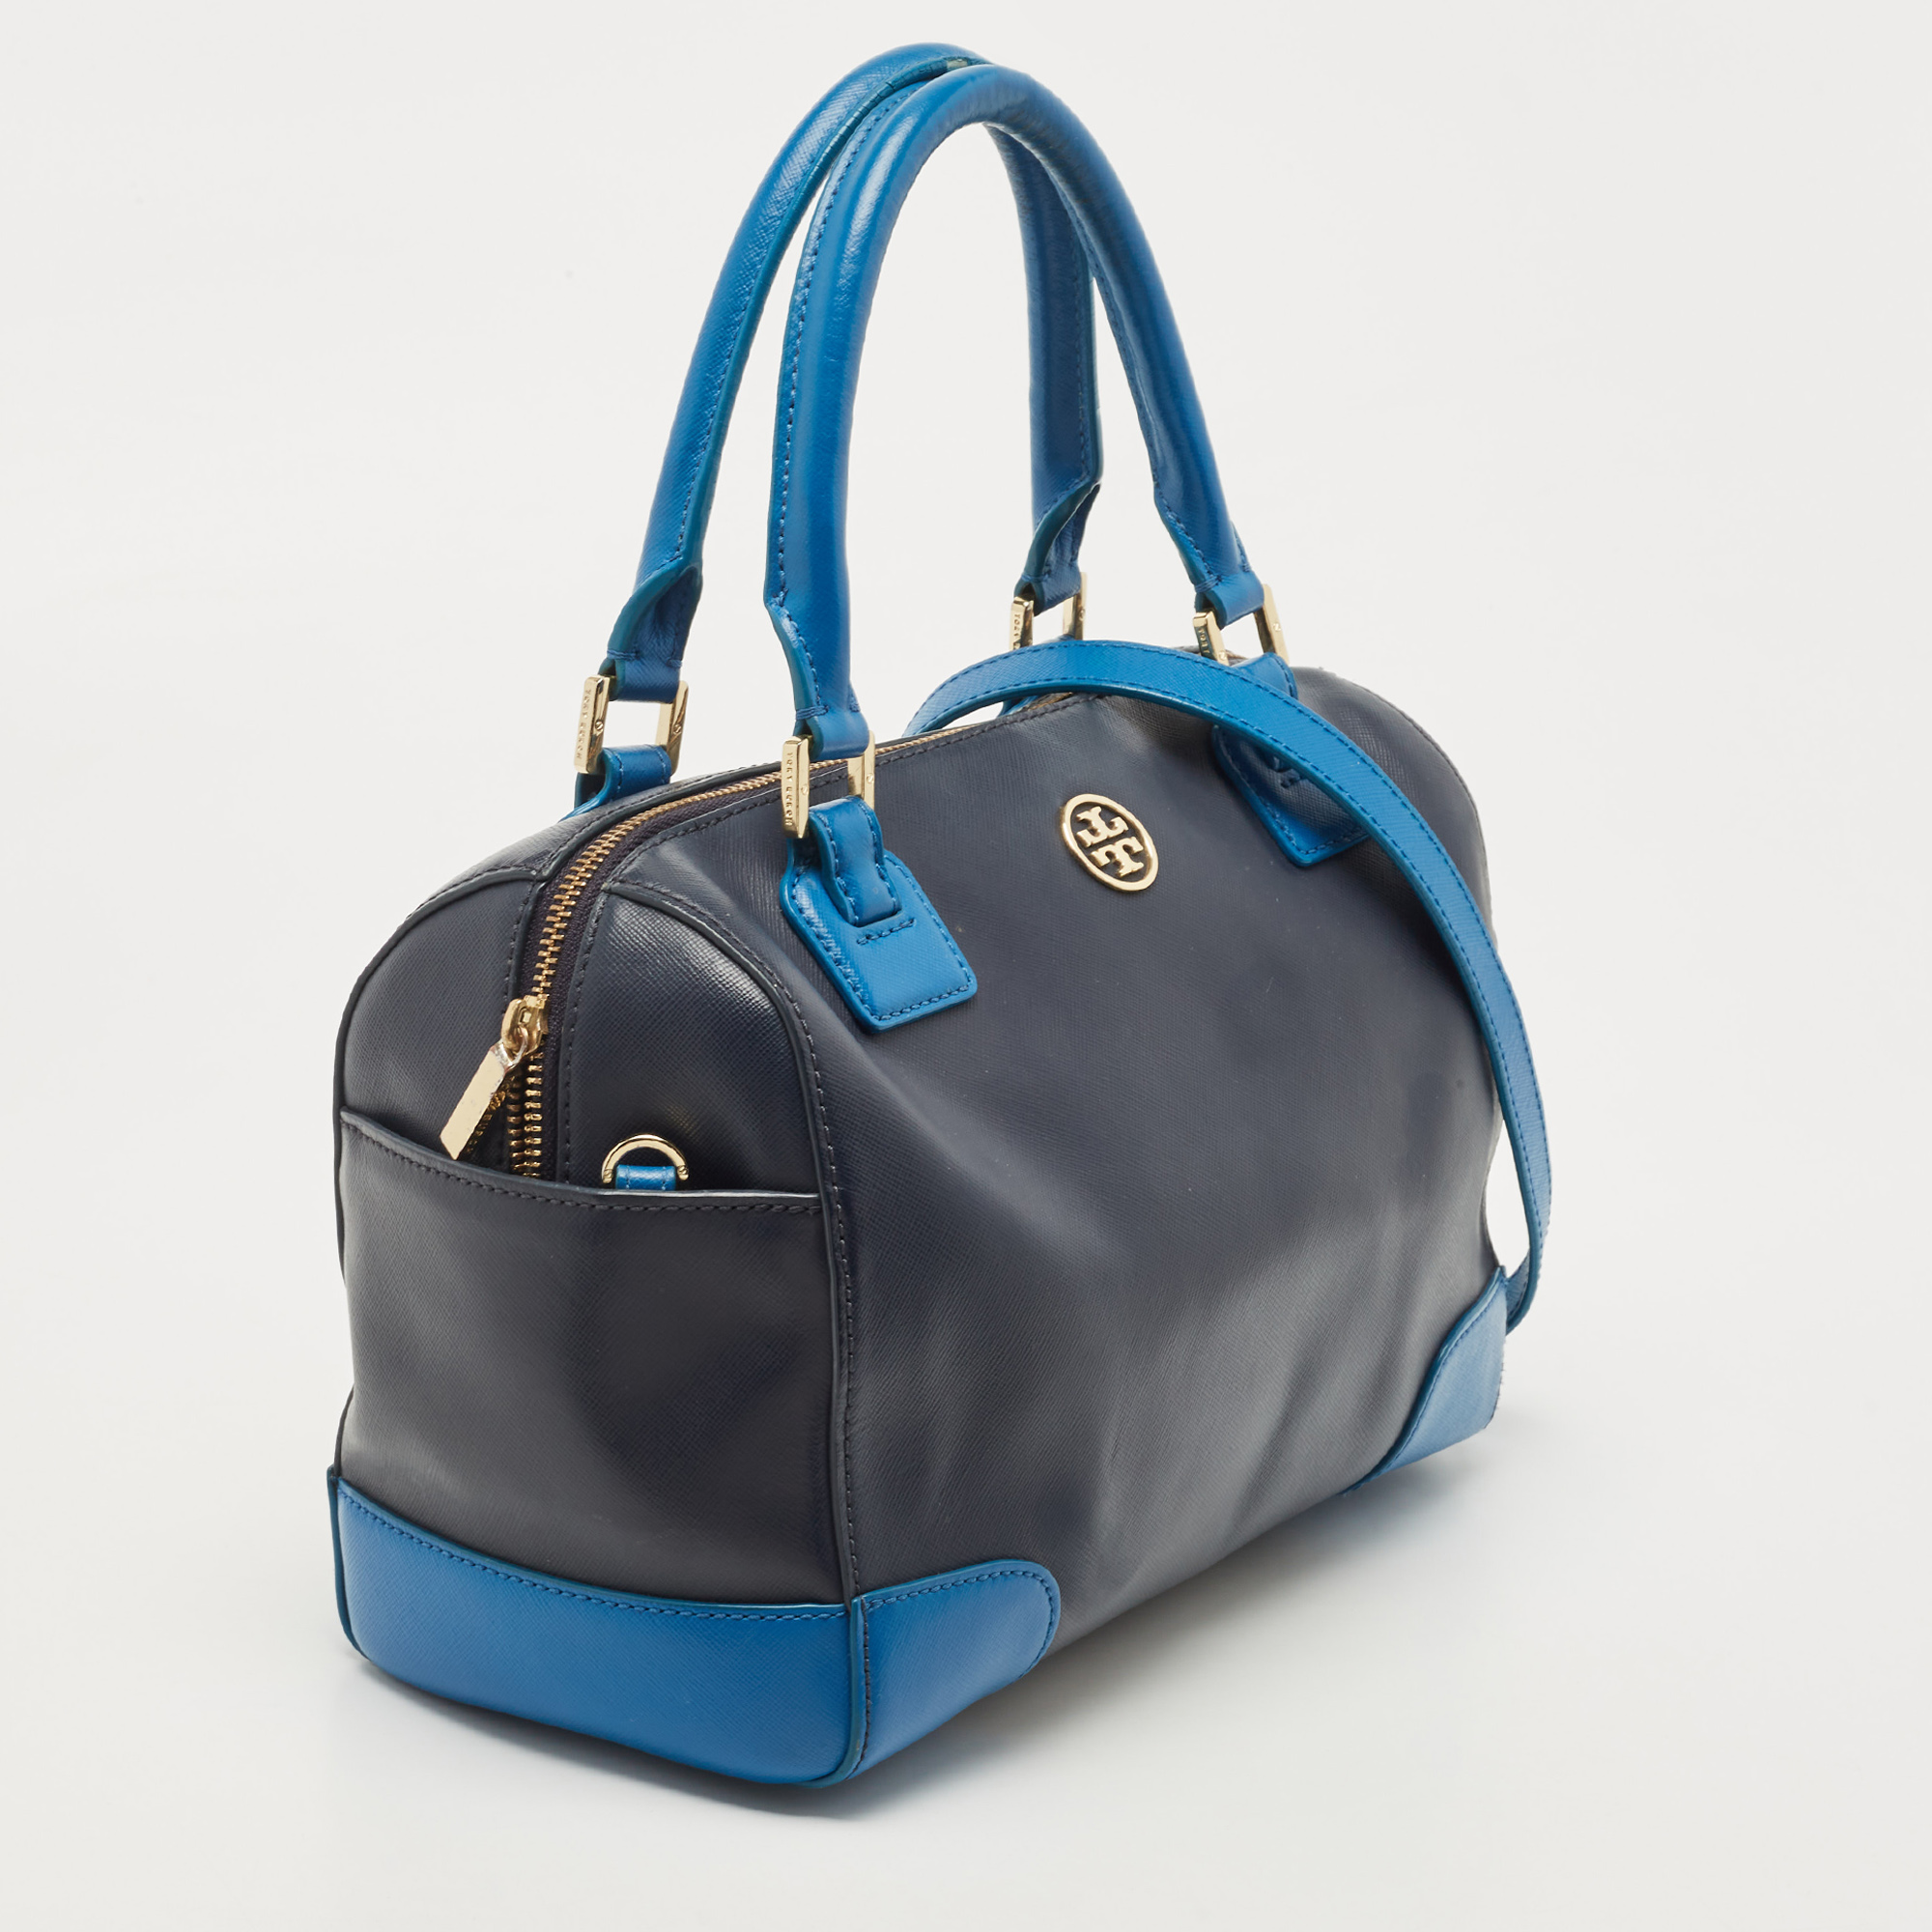 Tory Burch Two Tone Blue Leather Robinson Middy Satchel